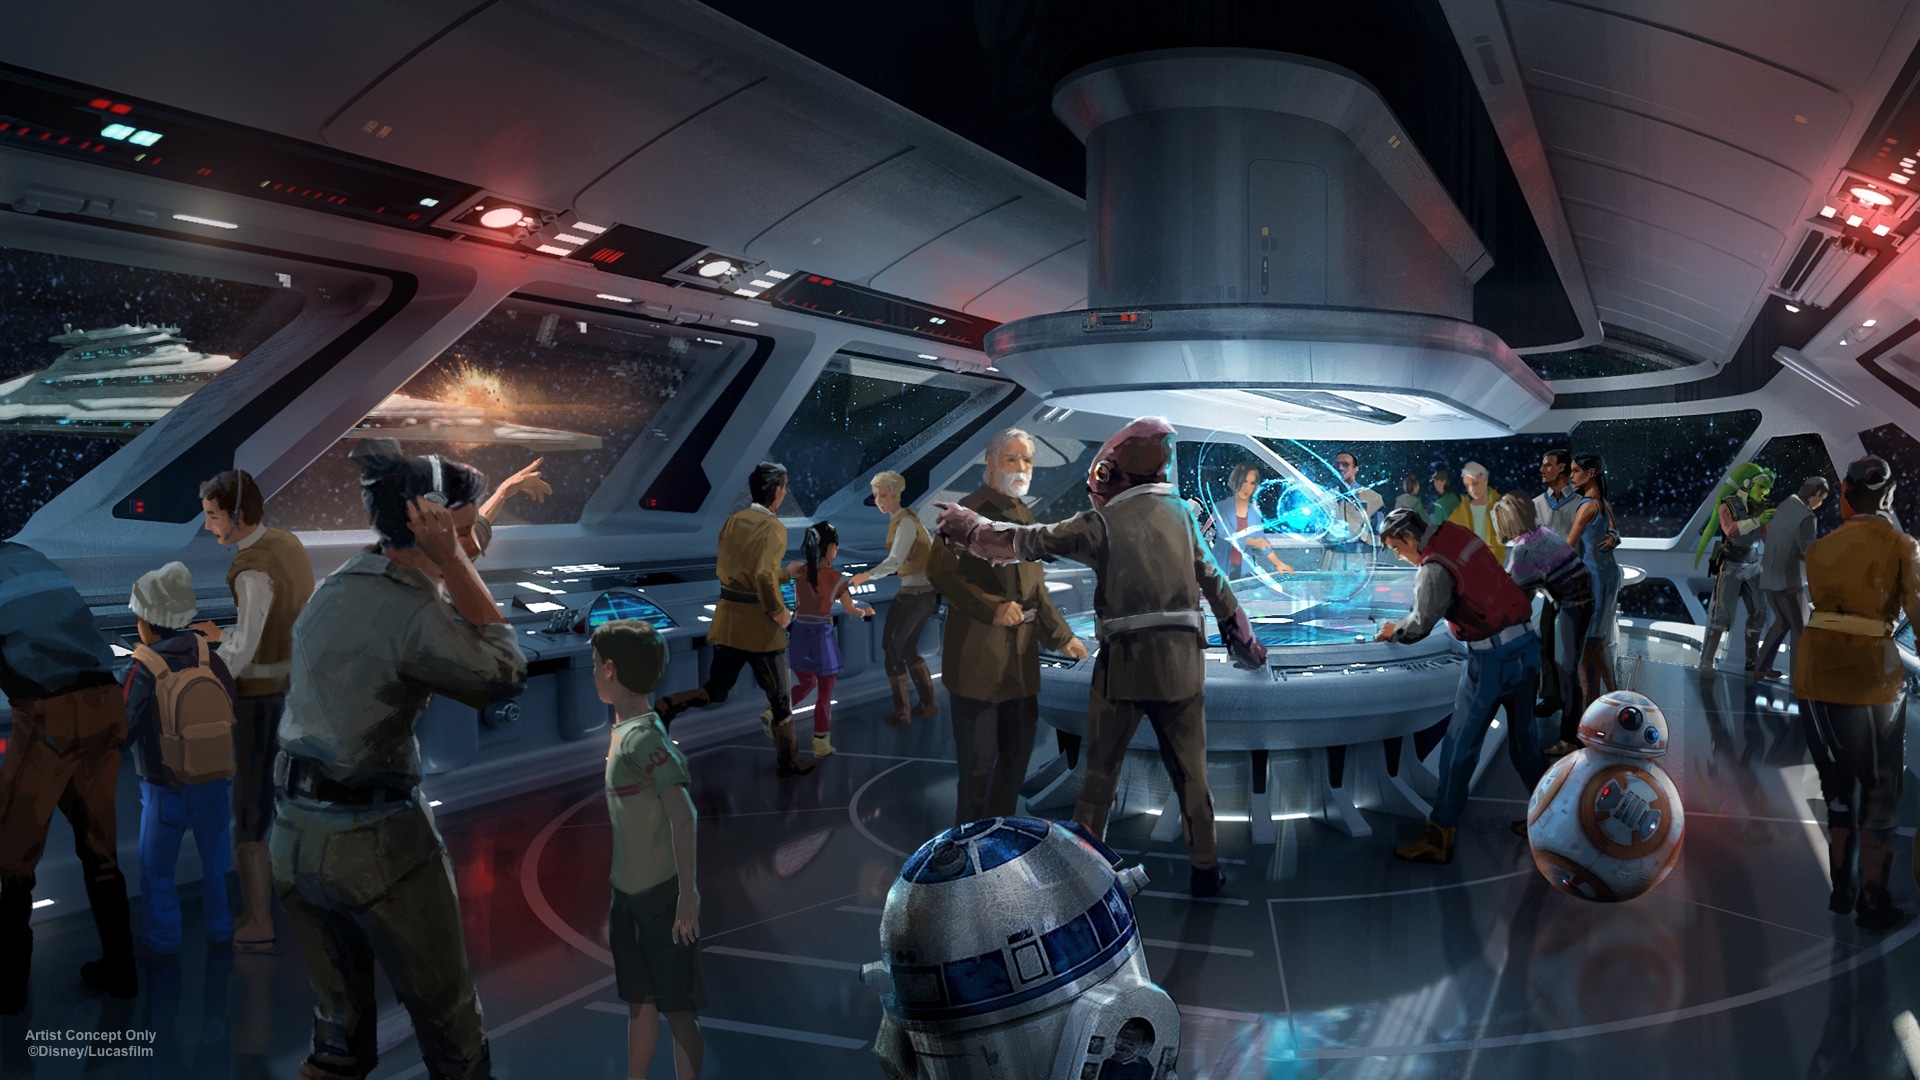 Disney Star Wars hotel with complete immersive experiences